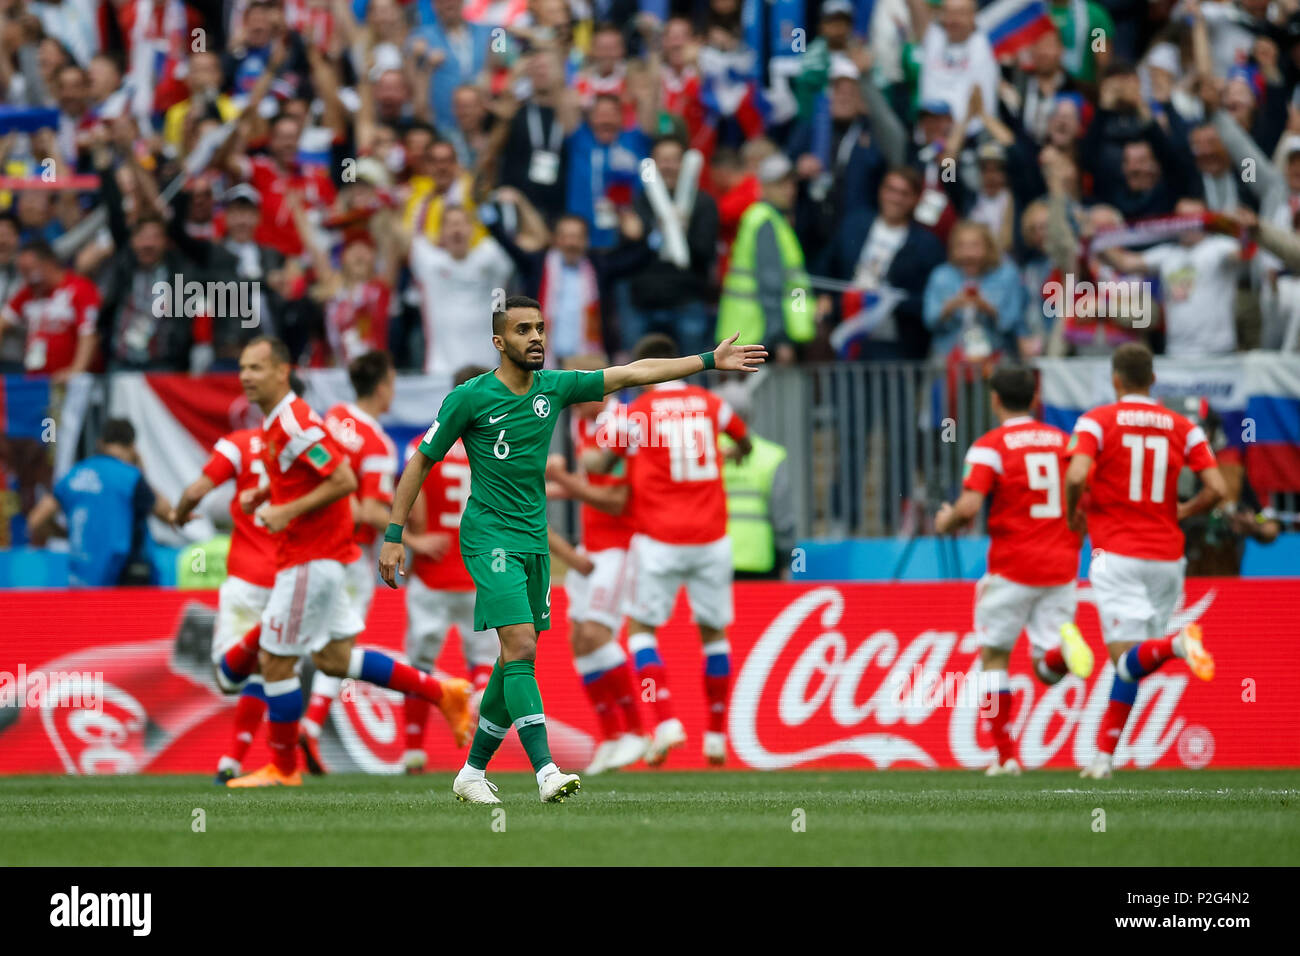 Moscow, Russia. 14th June 2018. Mohammed Al-Breik of Saudi Arabia looks dejected after his side concede their first goal to make the score 1-0 during the 2018 FIFA World Cup Group A match between Russia and Saudi Arabia at Luzhniki Stadium on June 14th 2018 in Moscow, Russia. Credit: PHC Images/Alamy Live News Stock Photo